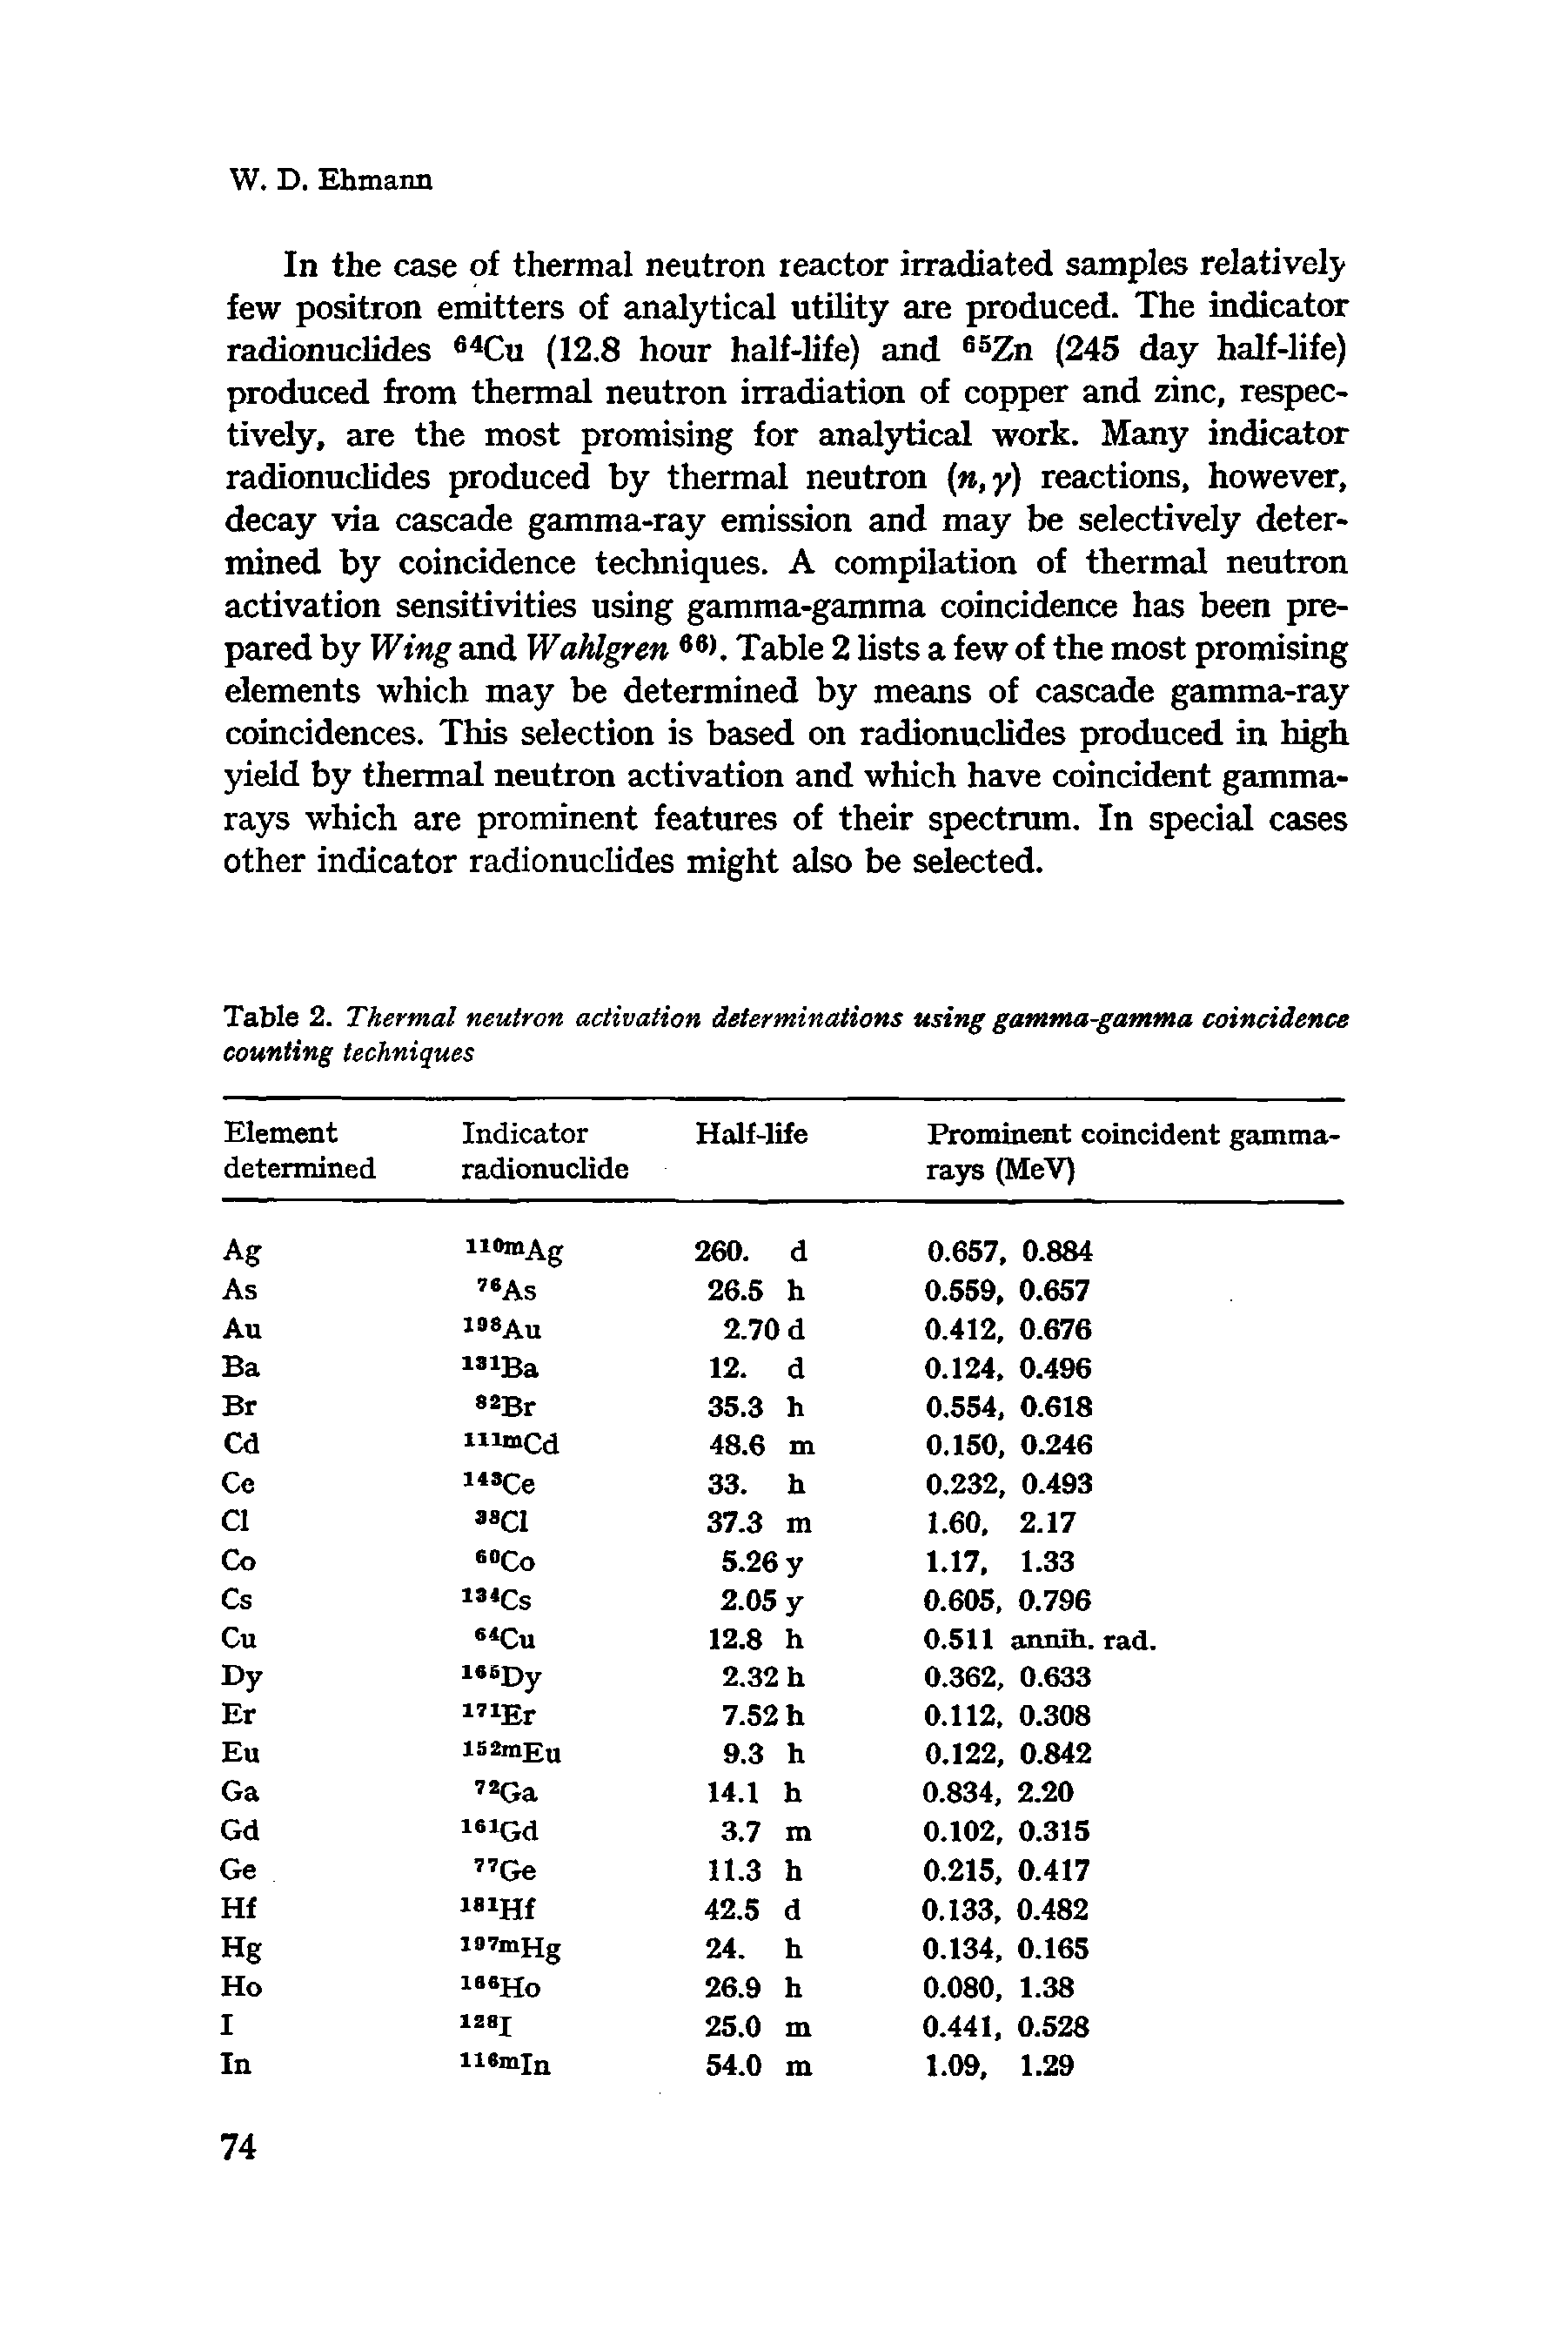 Table 2. Thermal neutron activation determinations using gamma-gamma coincidence counting techniques...